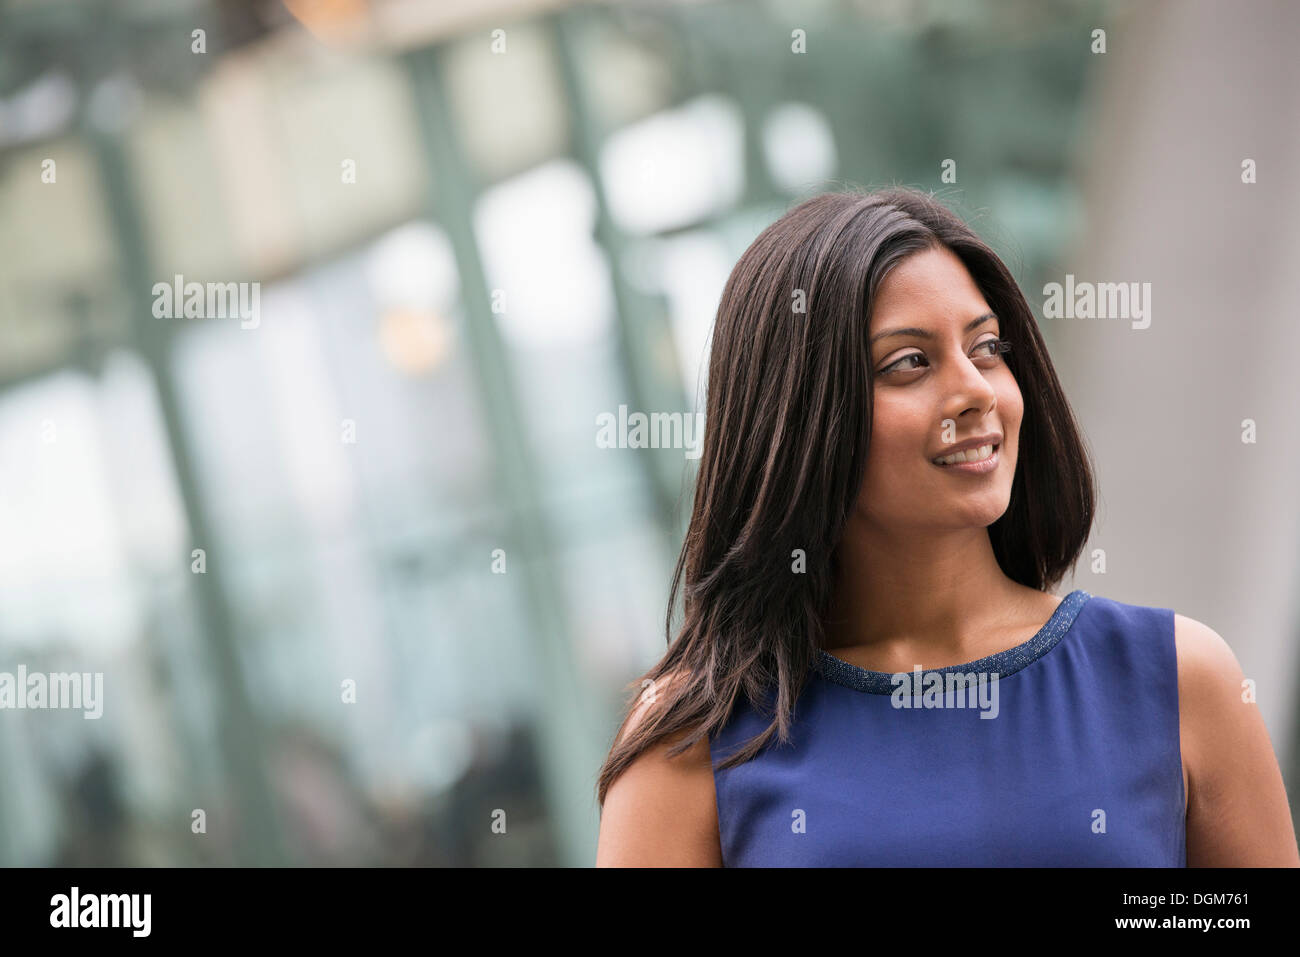 Business people. A woman with long black hair wearing a blue dress. Stock Photo